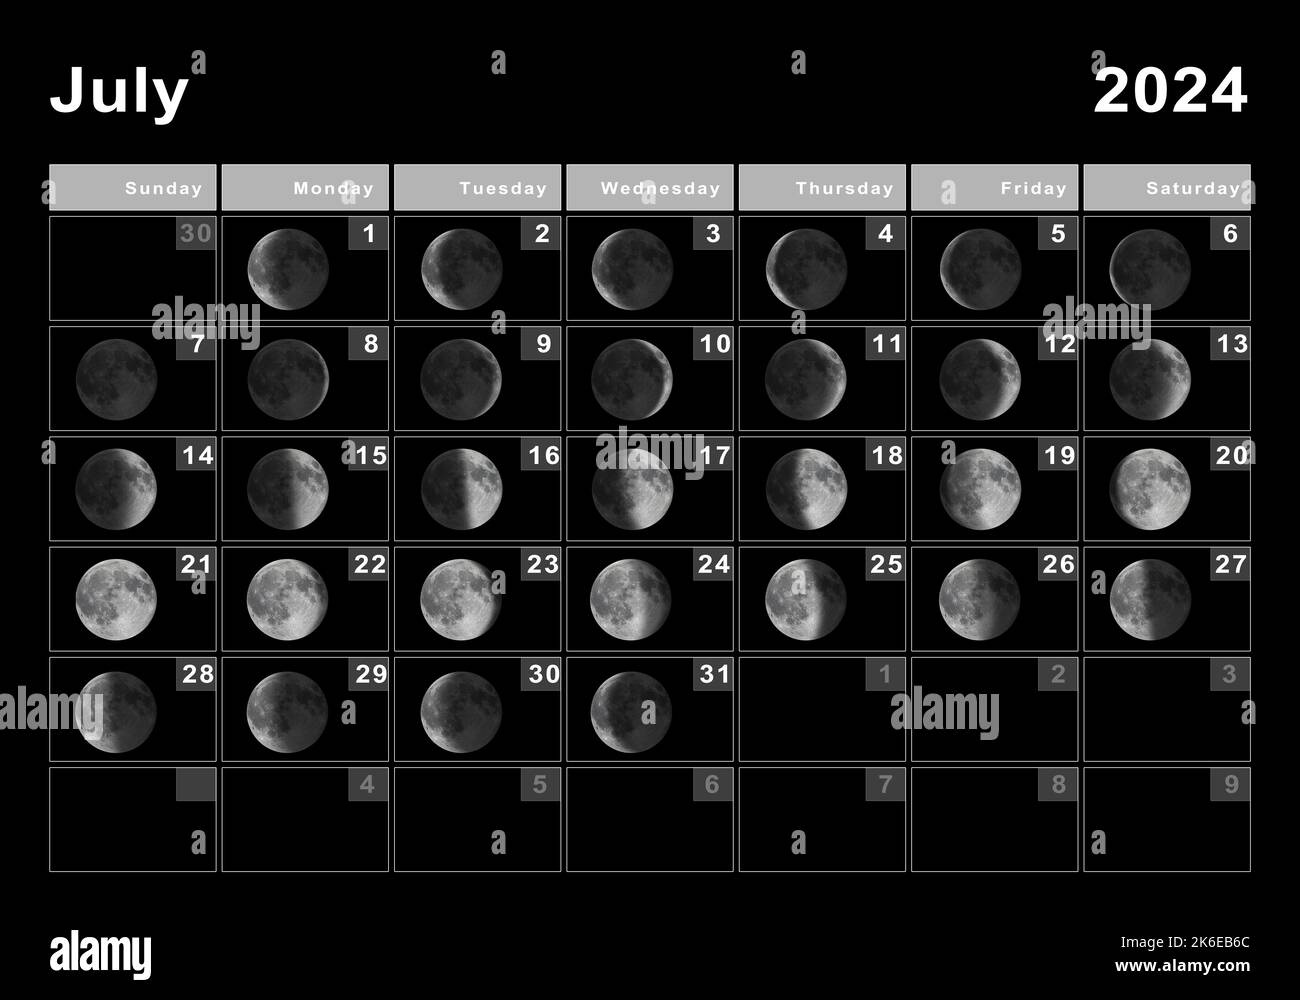 July 2024 Lunar Calendar, Moon Cycles, Moon Phases Stock Photo - Alamy within July 10th Lunar Calendar 2024